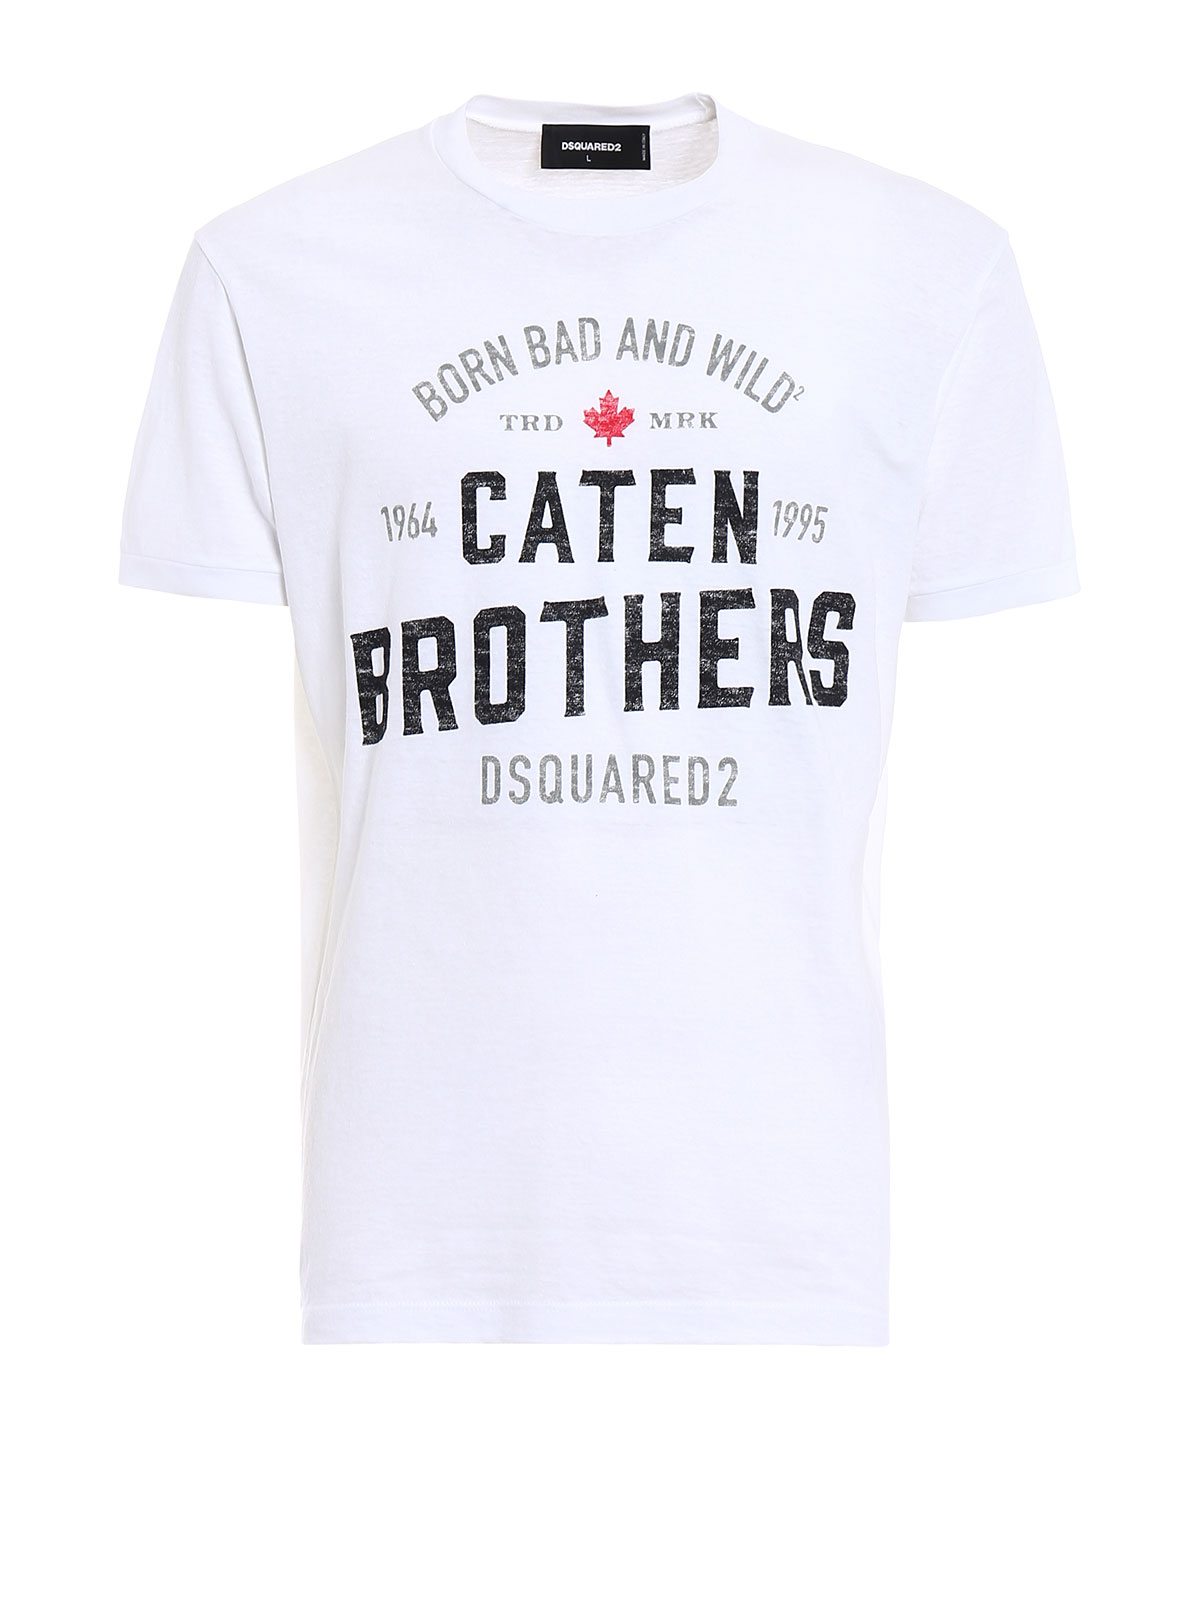 dsquared t shirt caten brothers